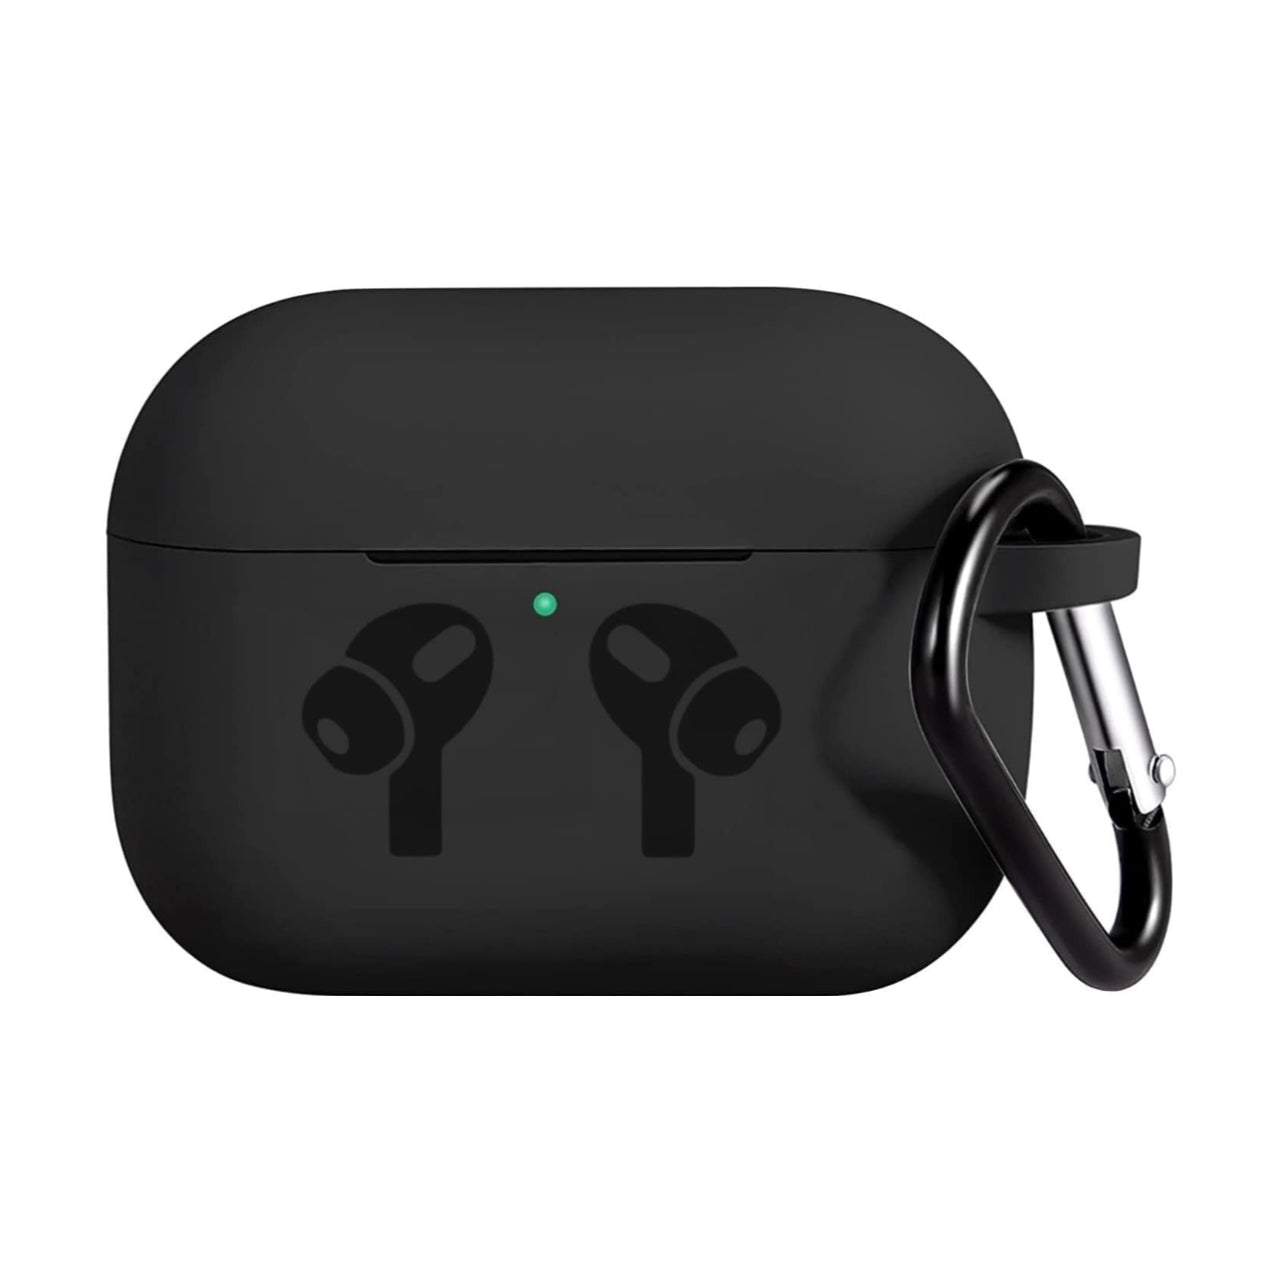 Soft Silicone Case with Keychain for AirPods Pro (Black)